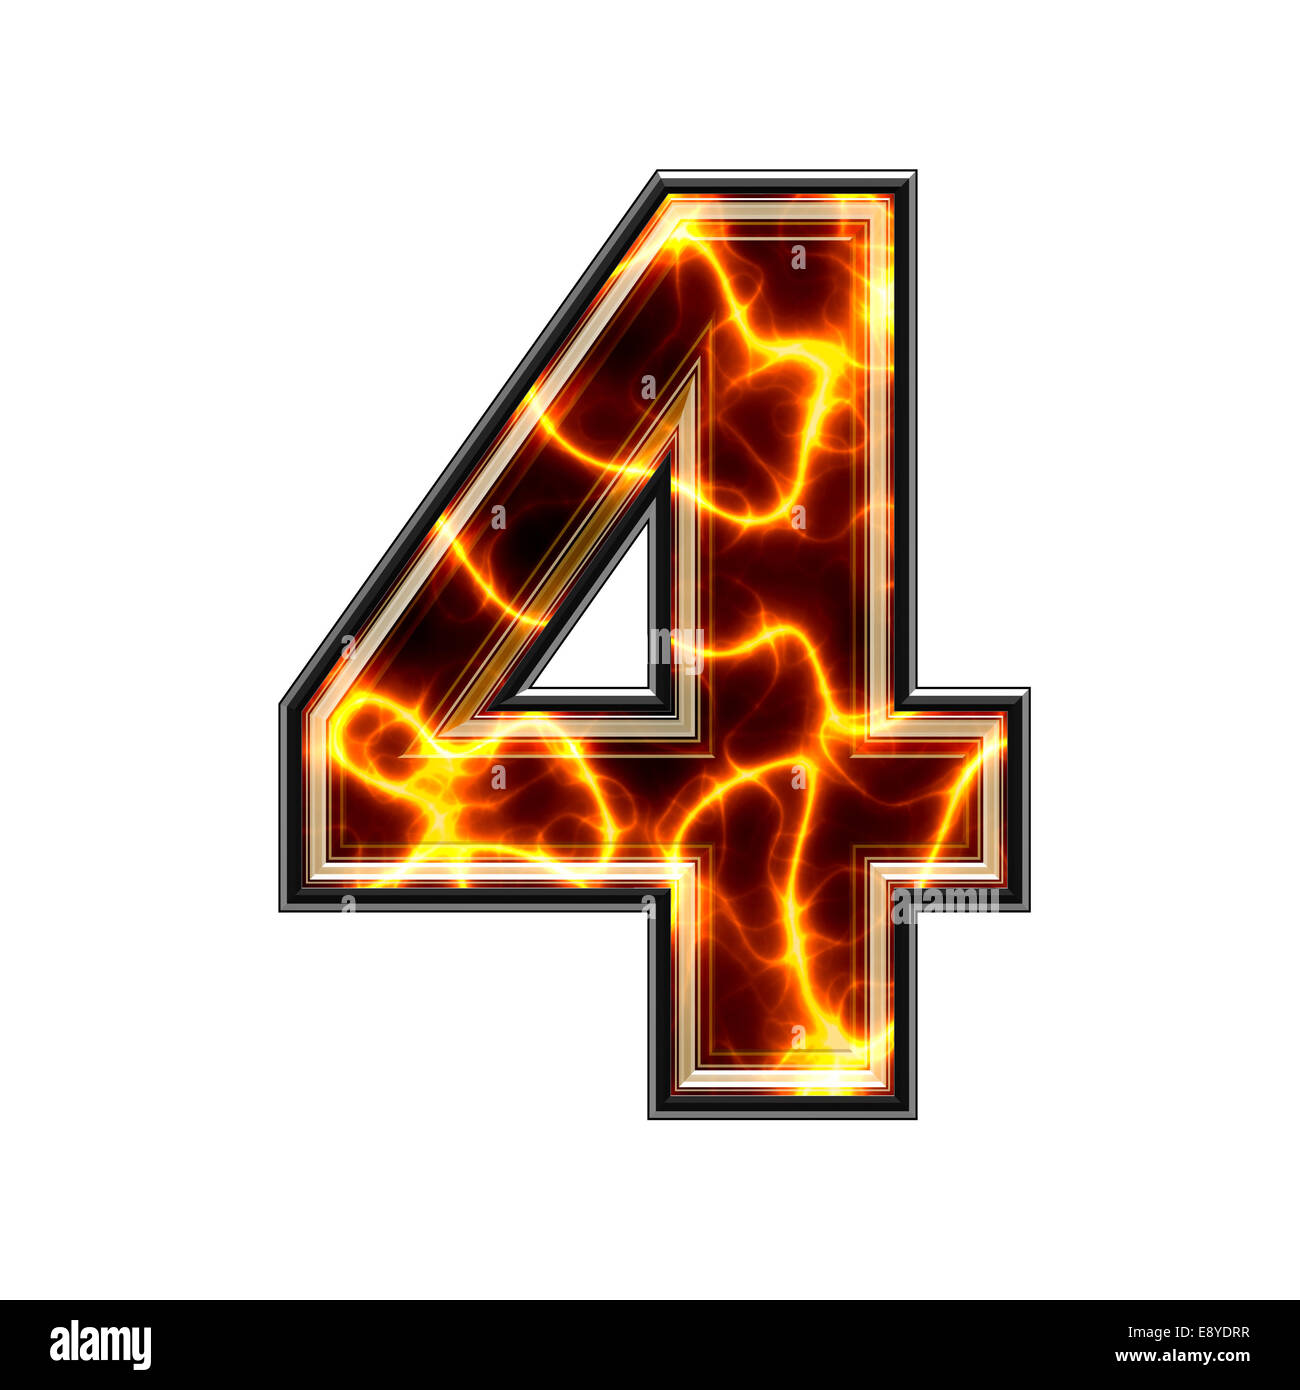 3d electric number -4- Stock Photo